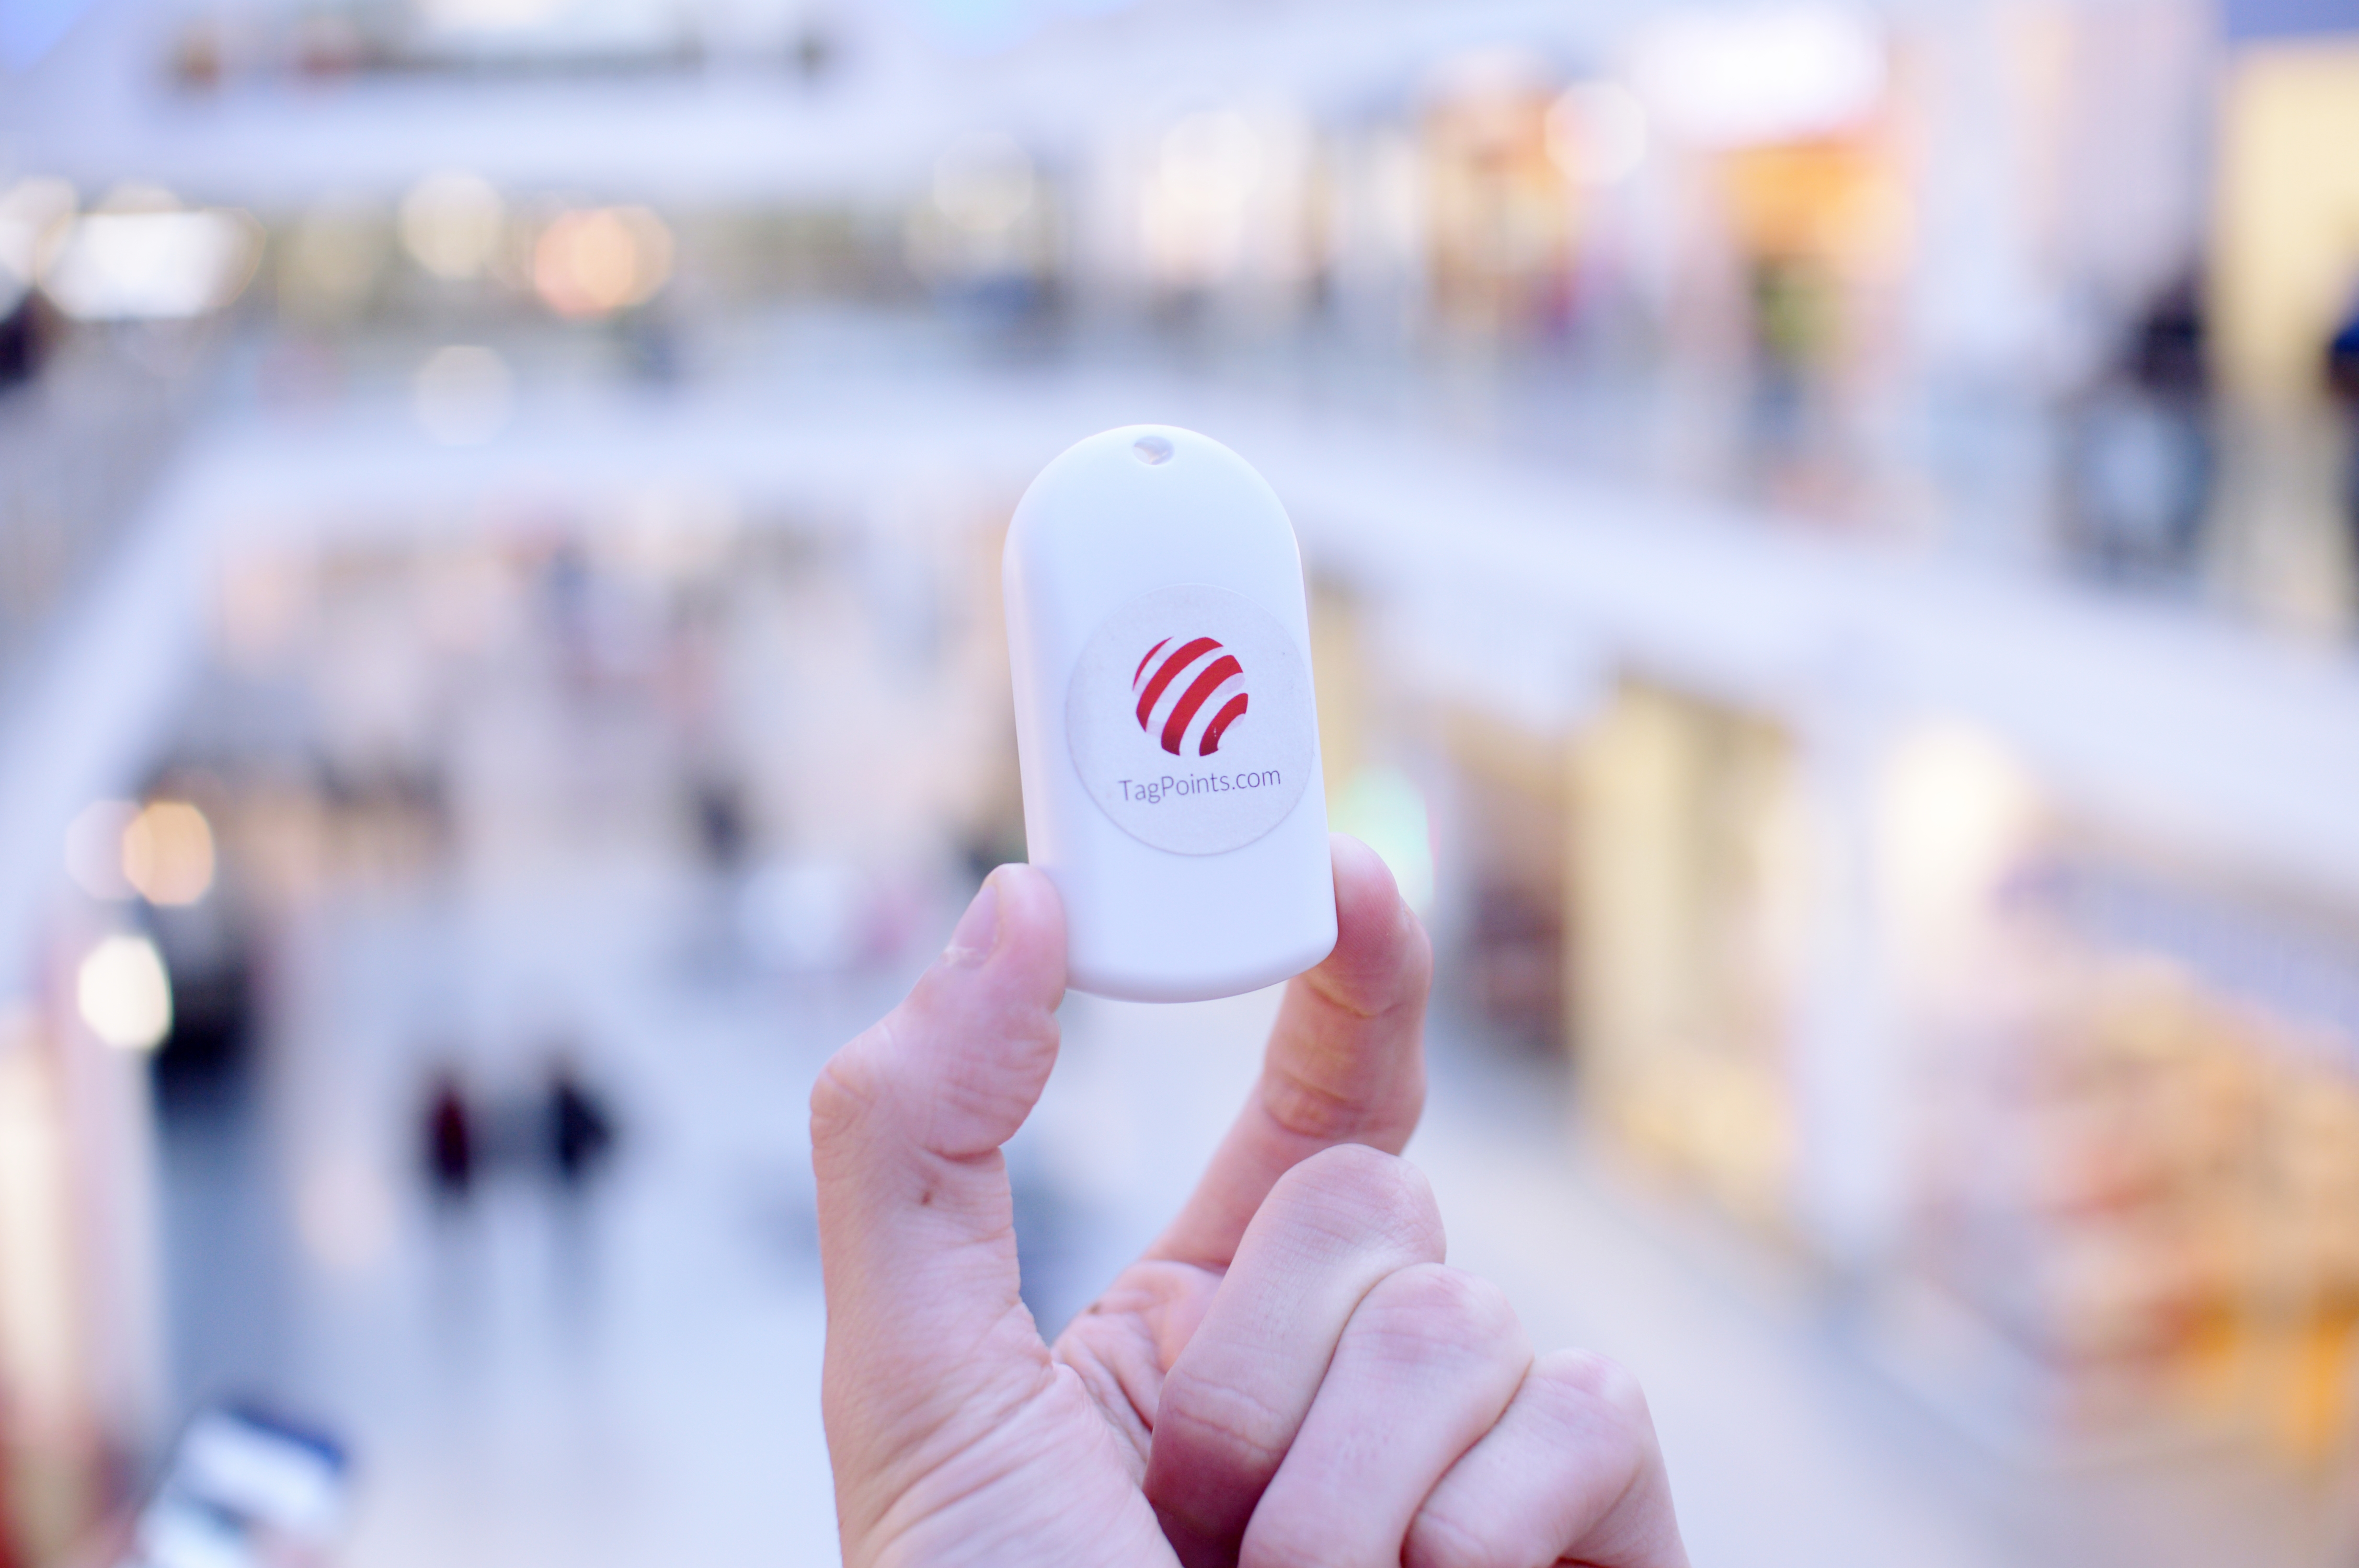 Eastleigh Shopping Centre is UK's First to Introduce Bluetooth Beacons